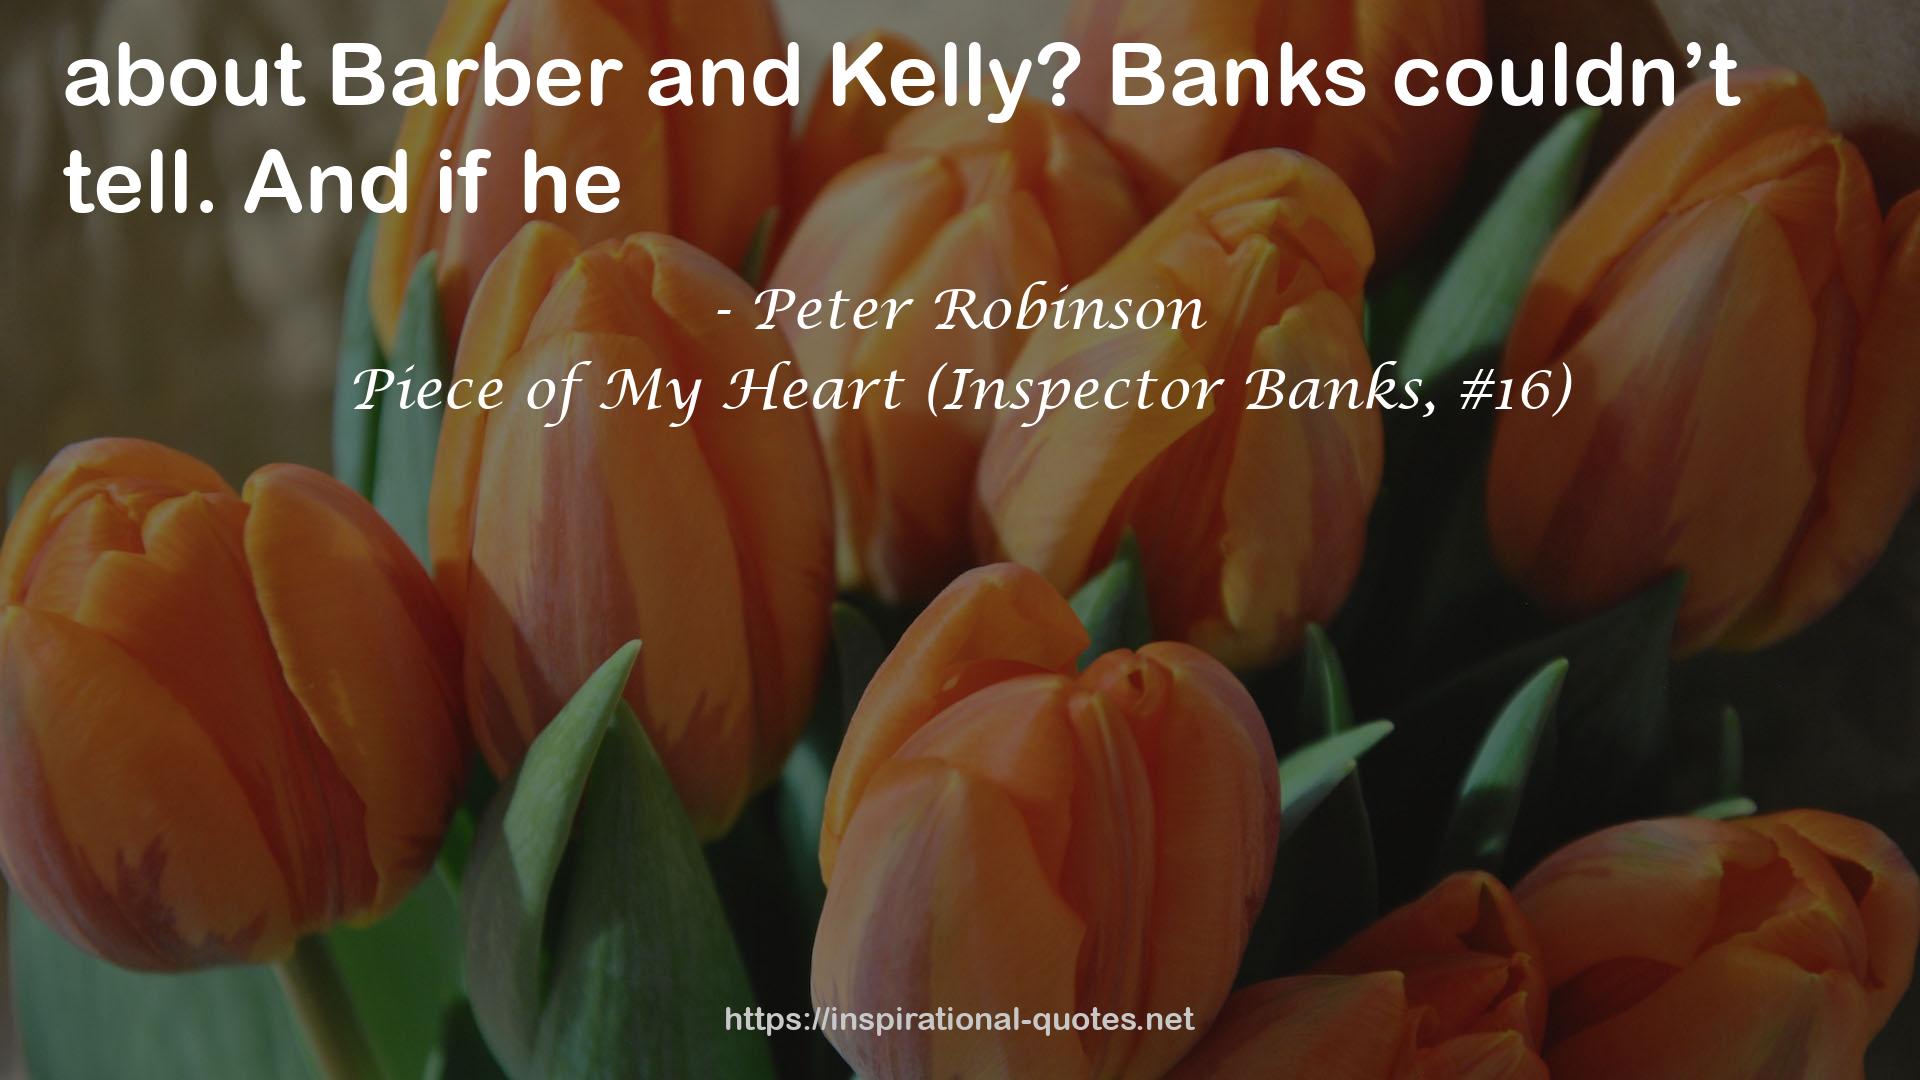 Piece of My Heart (Inspector Banks, #16) QUOTES